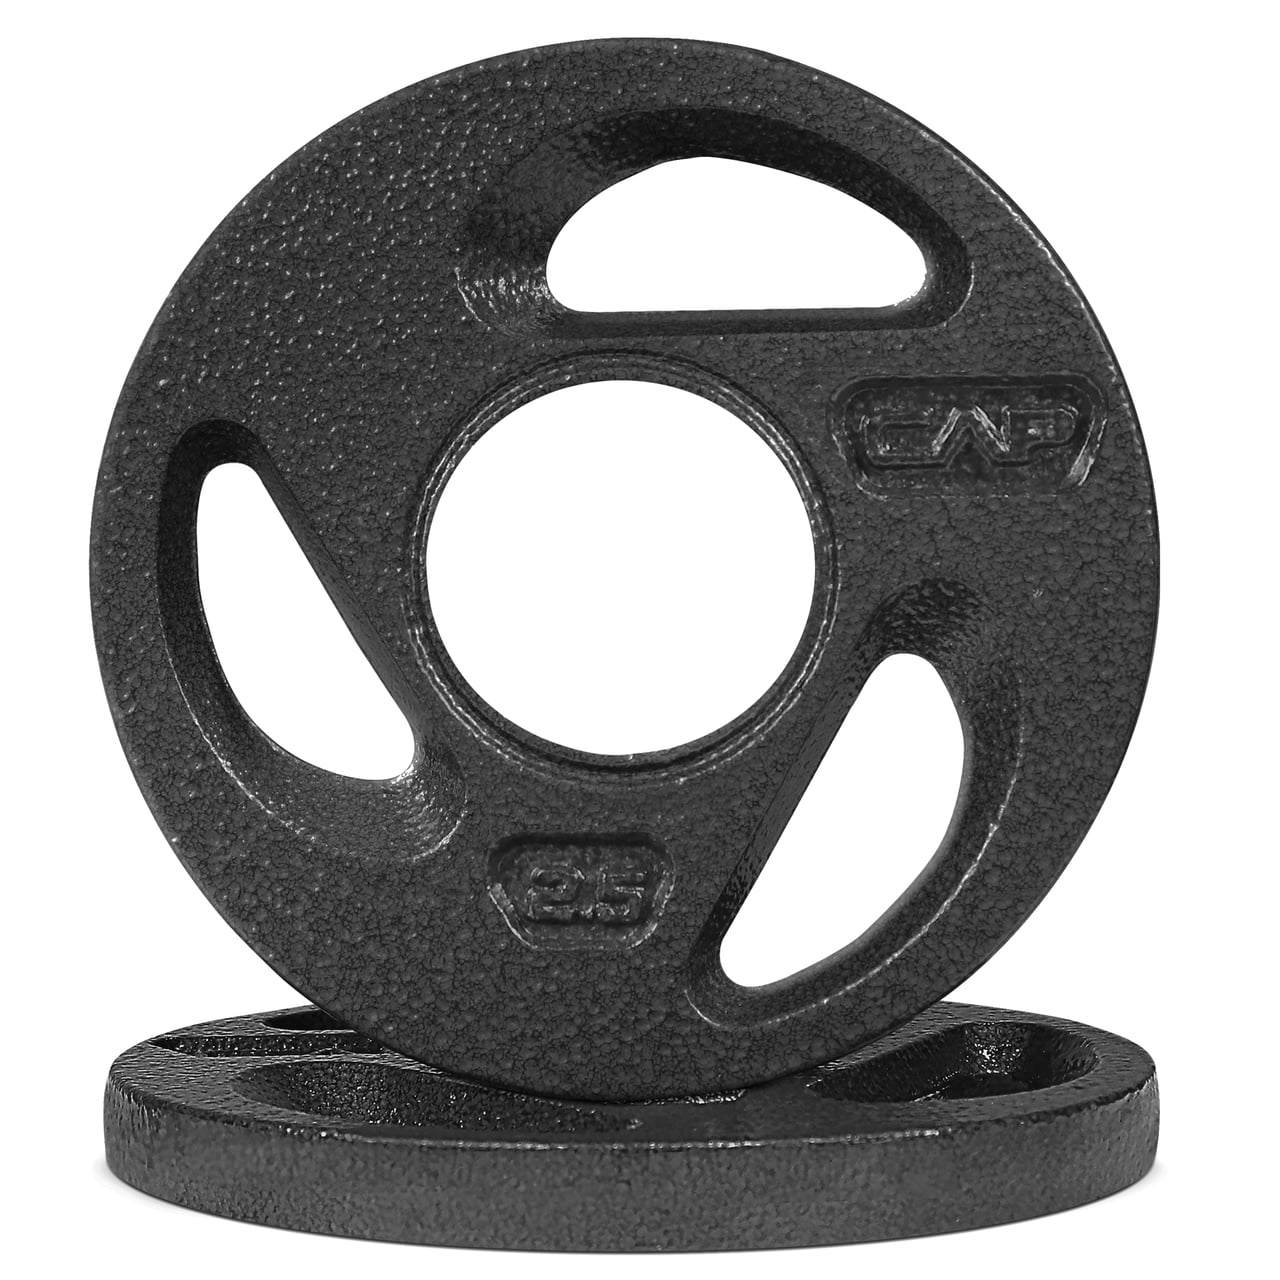 Available in 2.5 25 & 45lb 5 2-inch Diameter Collar Opening for Compatibility on any Olympic Barbell 10 WF Athletic Supply Olympic Grip Plate 